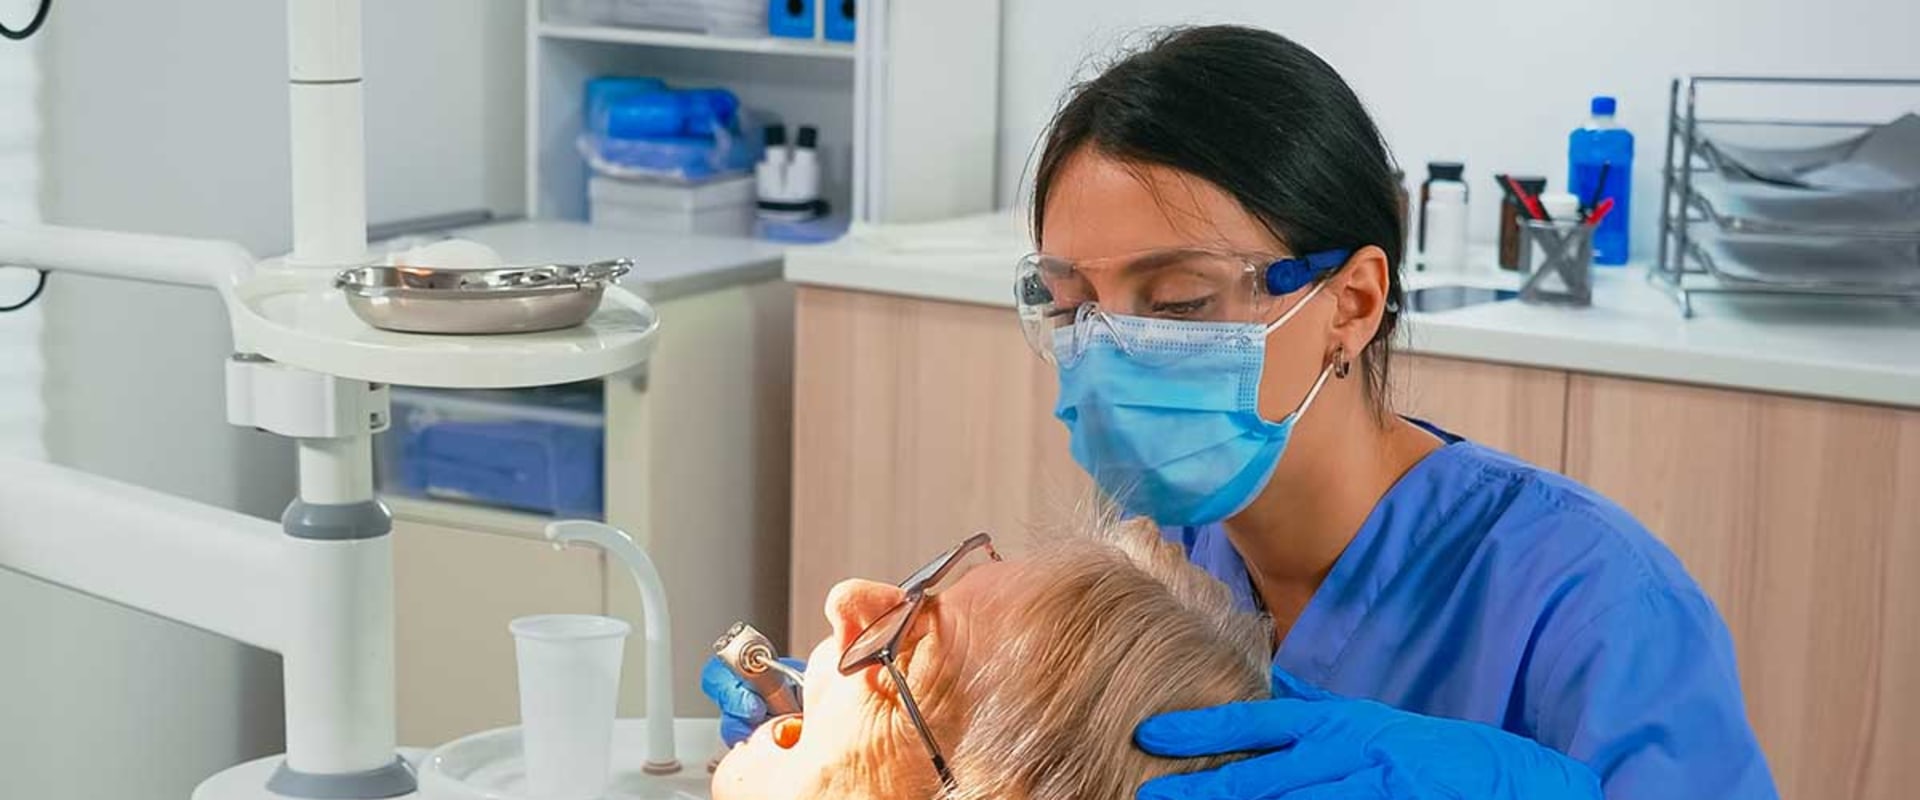 What services do emergency dentists provide?